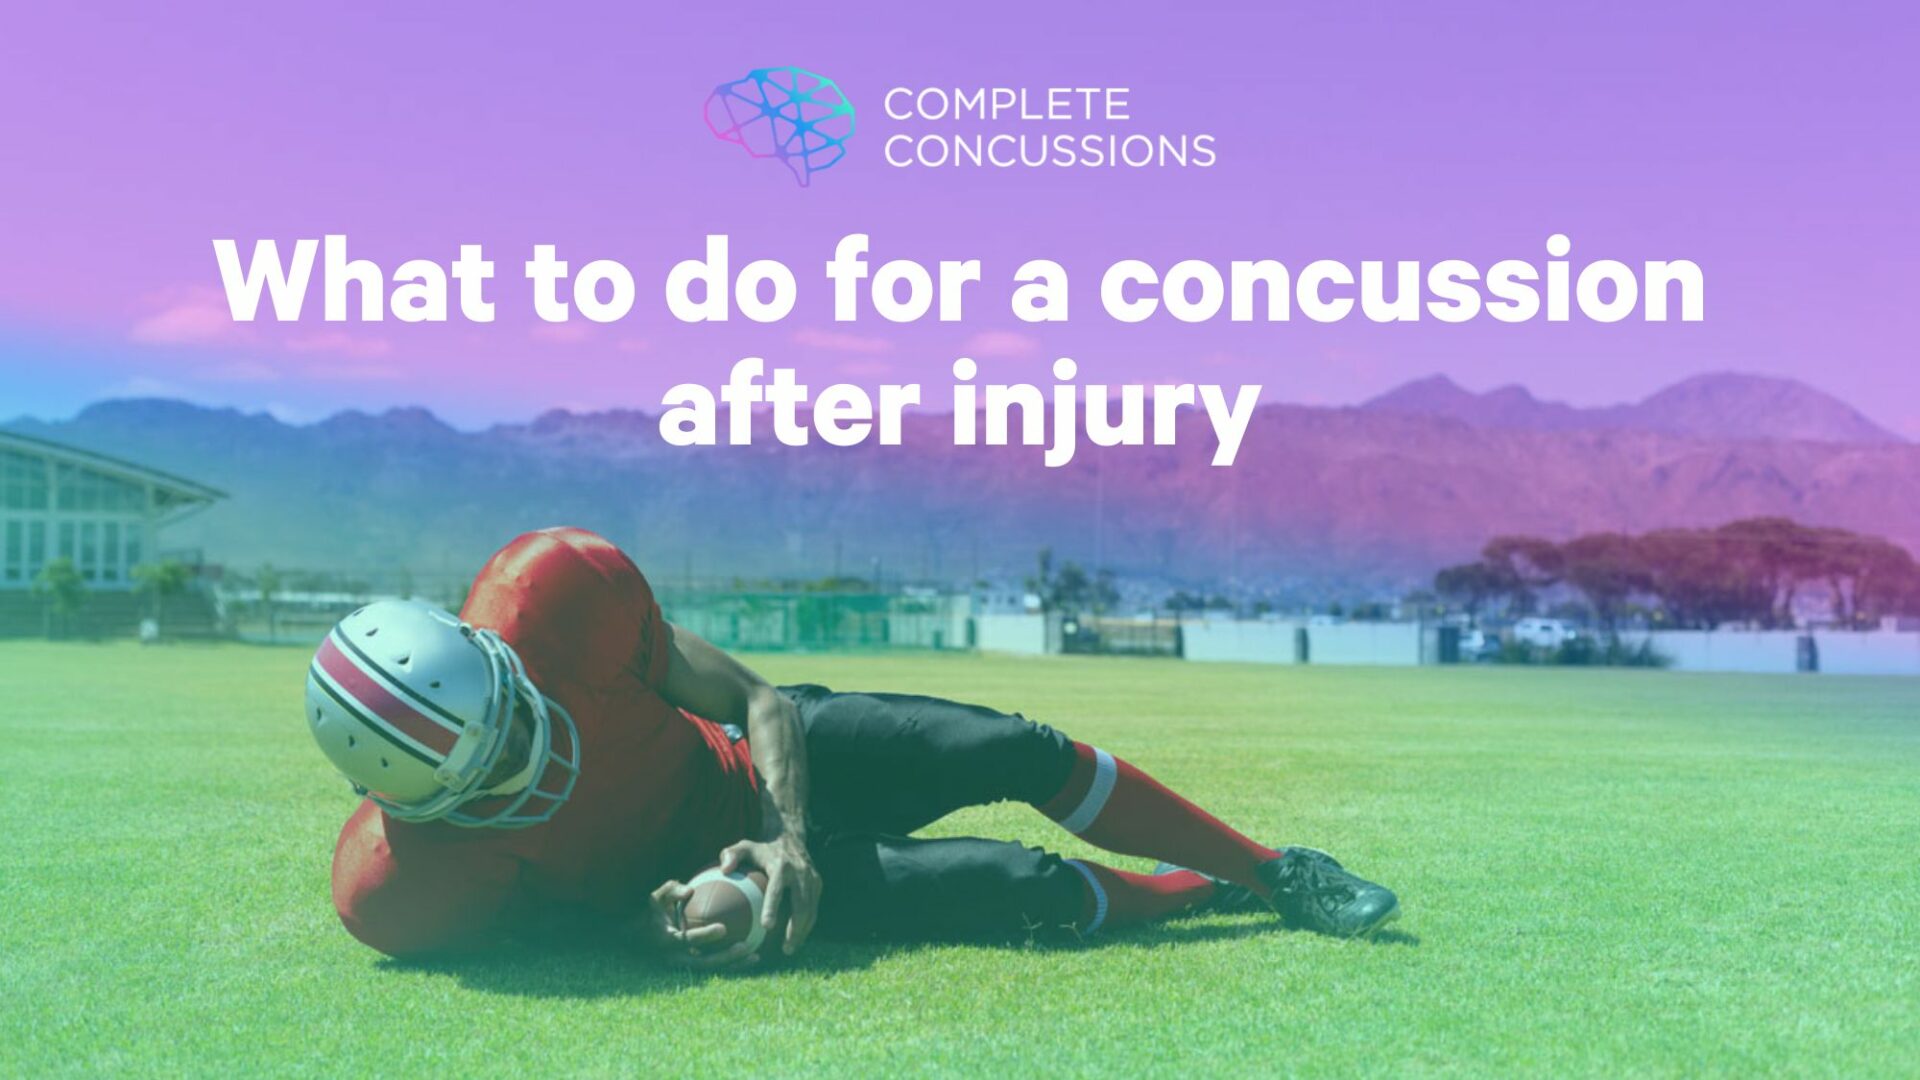 What to do for a concussion after injury